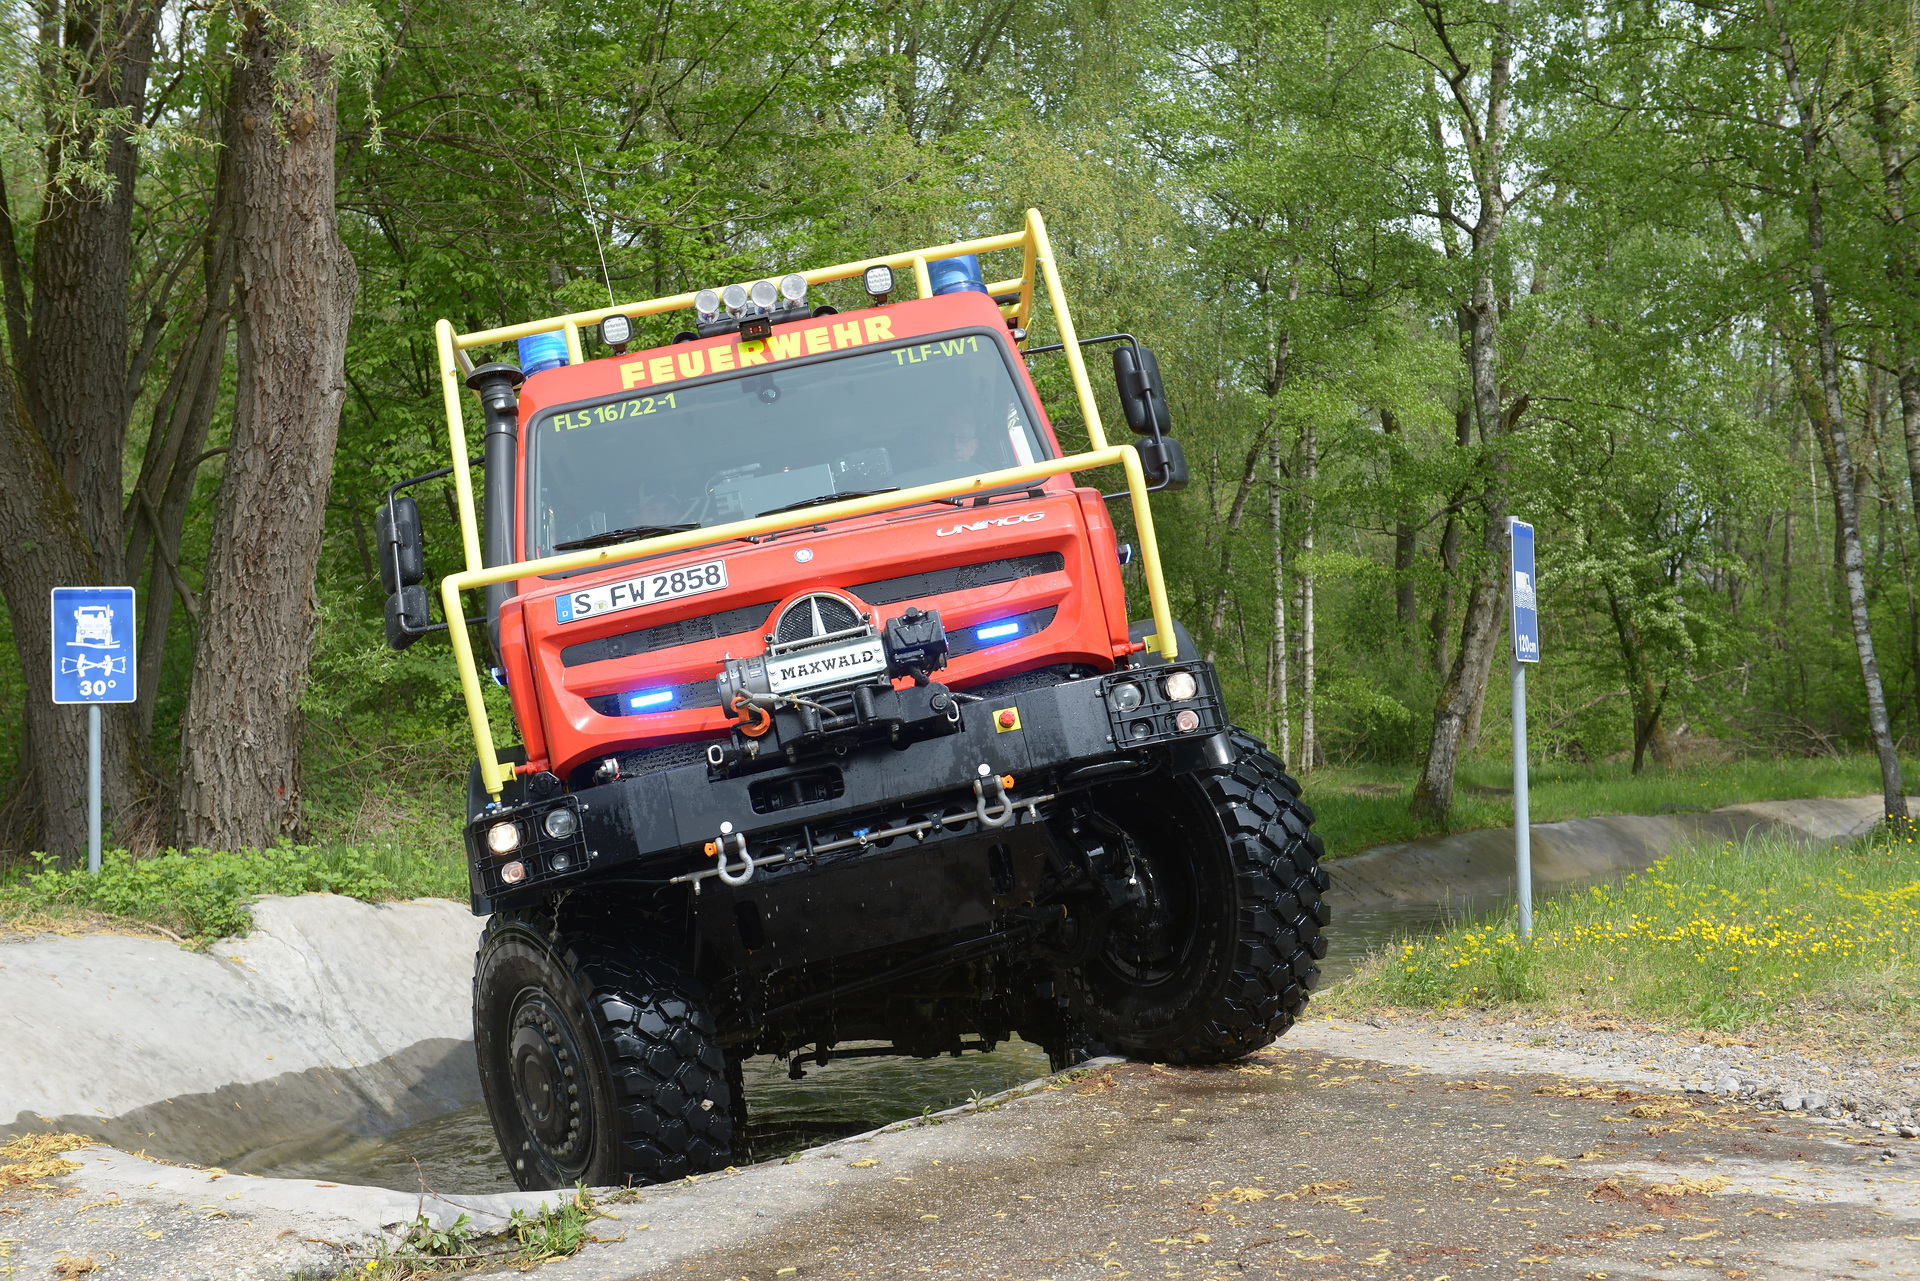 Mercedes-Benz Unimog for Forestry Applications to Debut at 2018